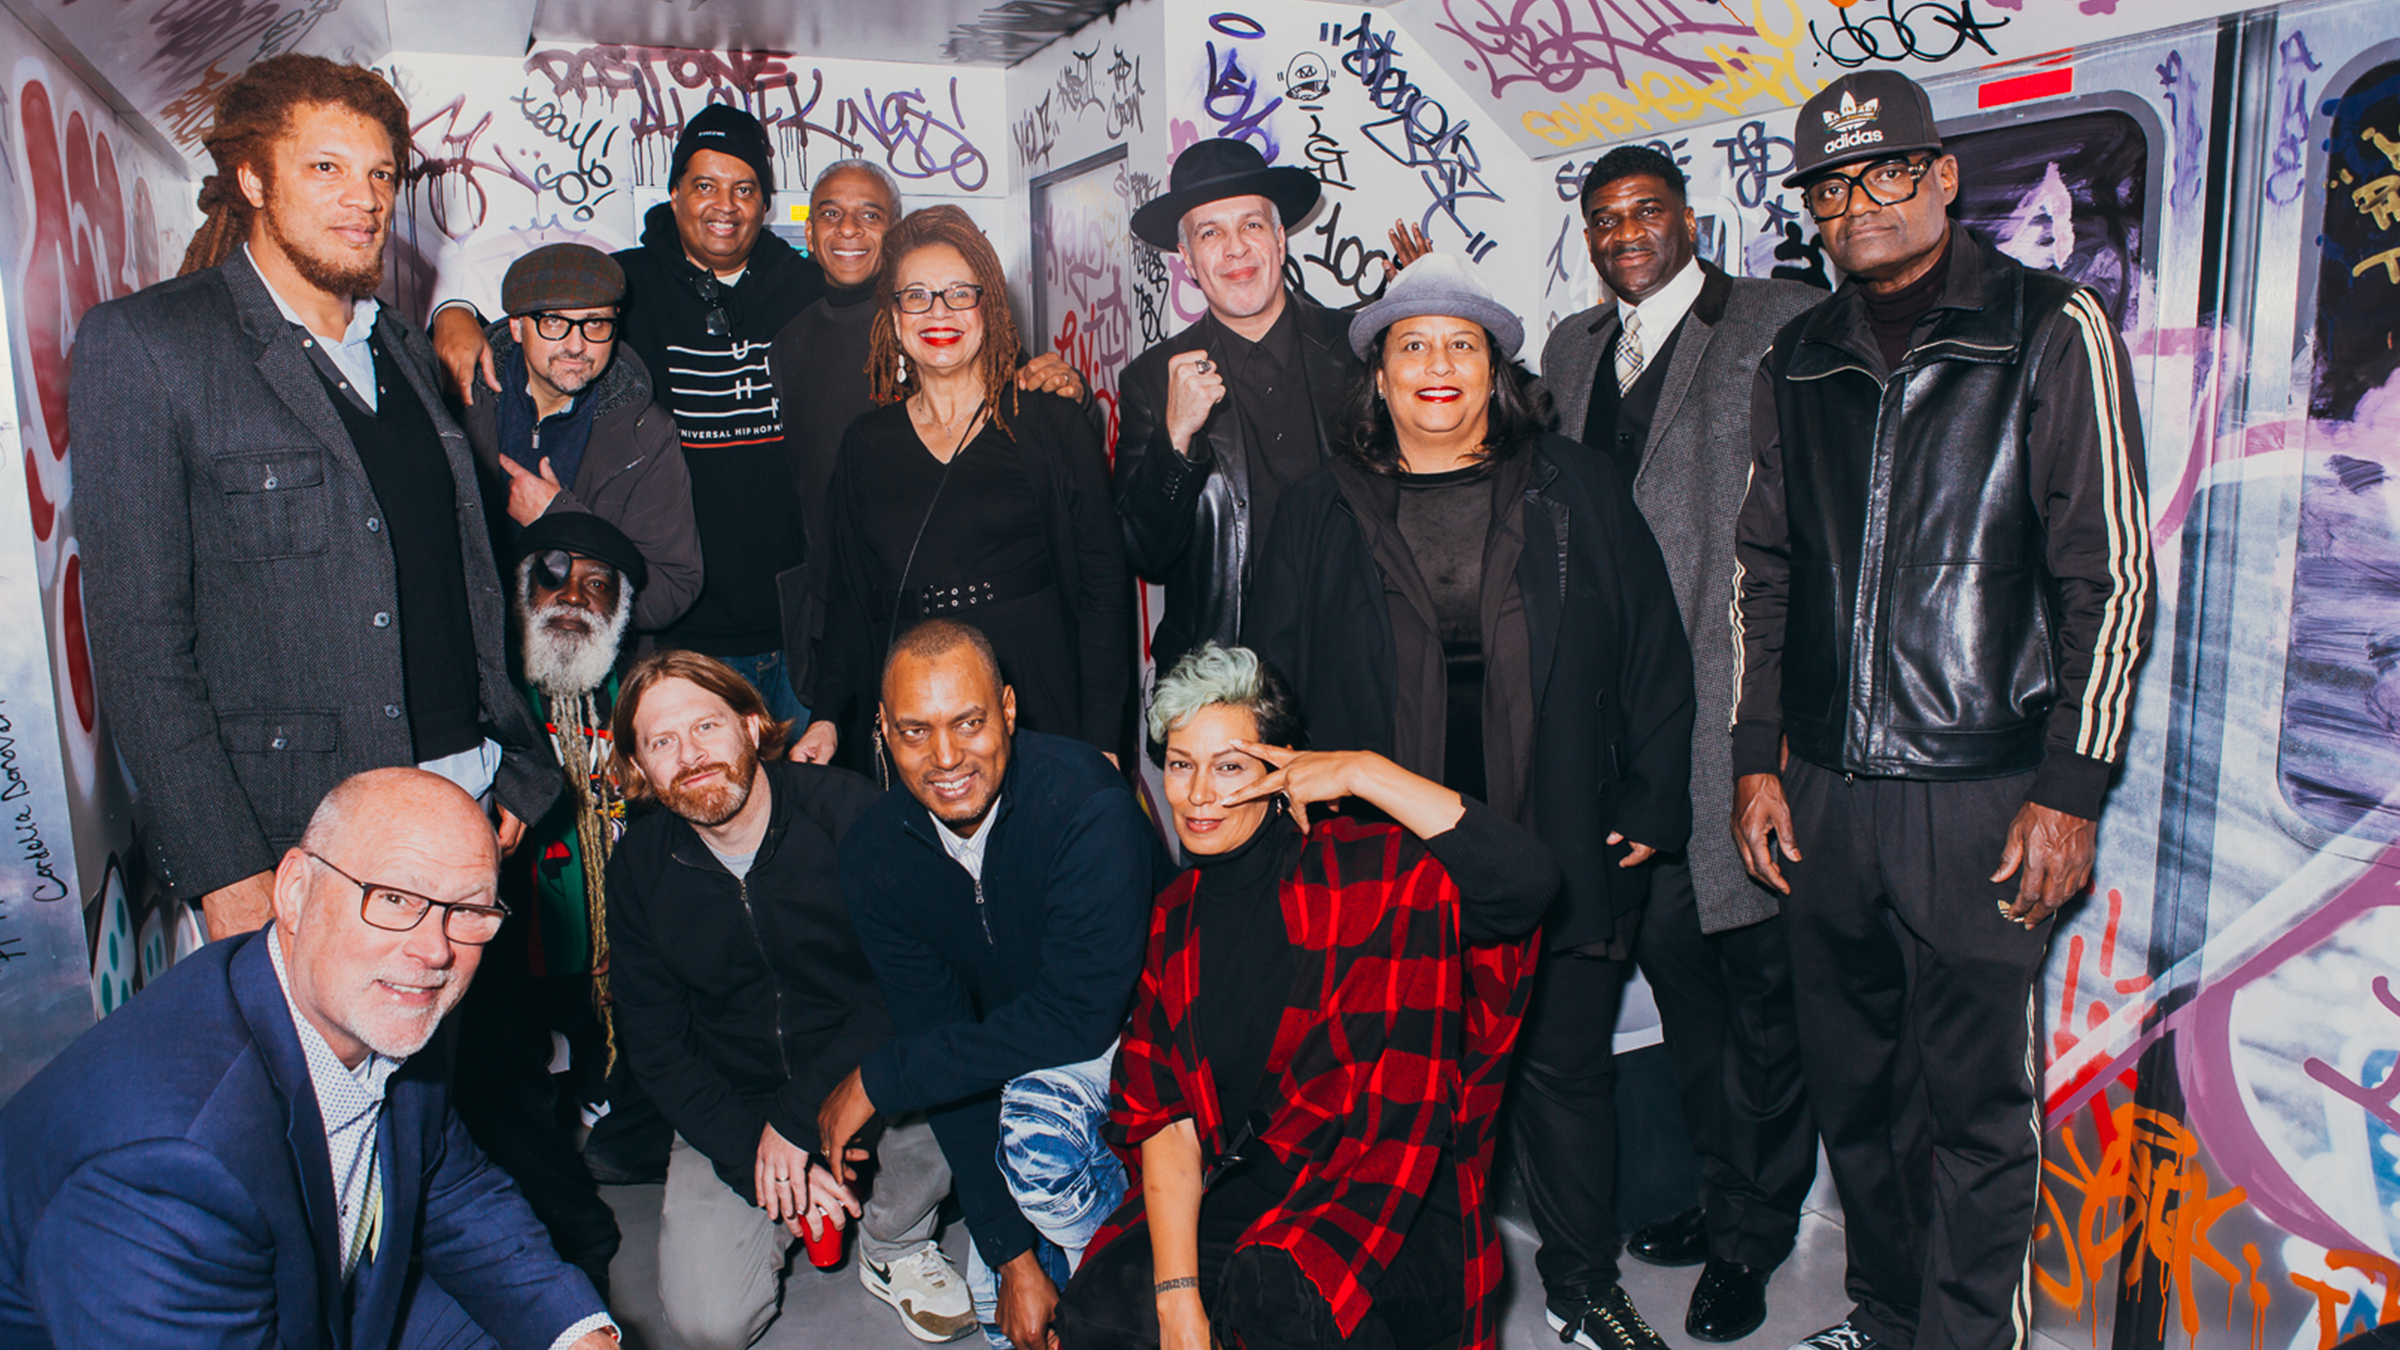 The team that brought the [R]Evolution of Hip Hop to life includes hip hop artists and managers, journalists, curators, professors, collectors, Bronx community activists, and more